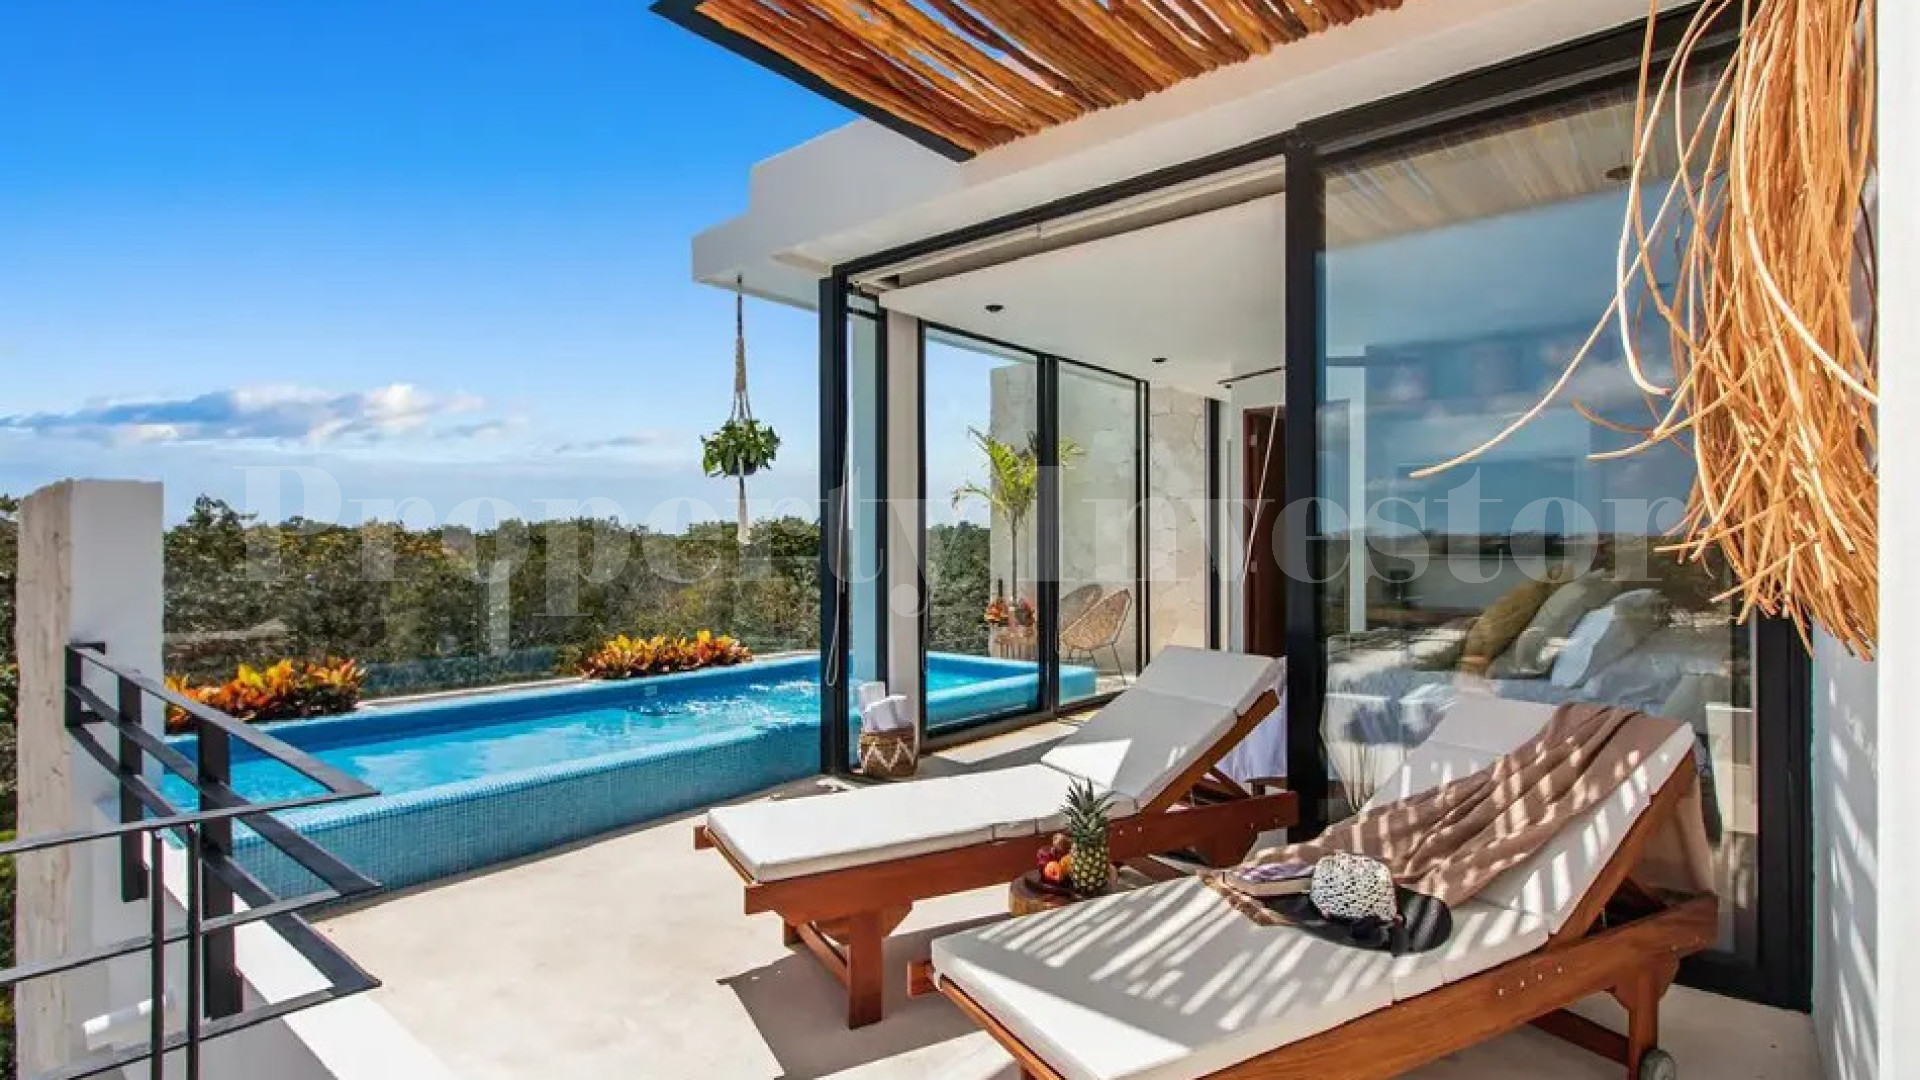 Fantastic 2 Bedroom Boutique Penthouse with Panoramic Jungle Views & Rooftop Pool for Sale in Tulum, Mexico